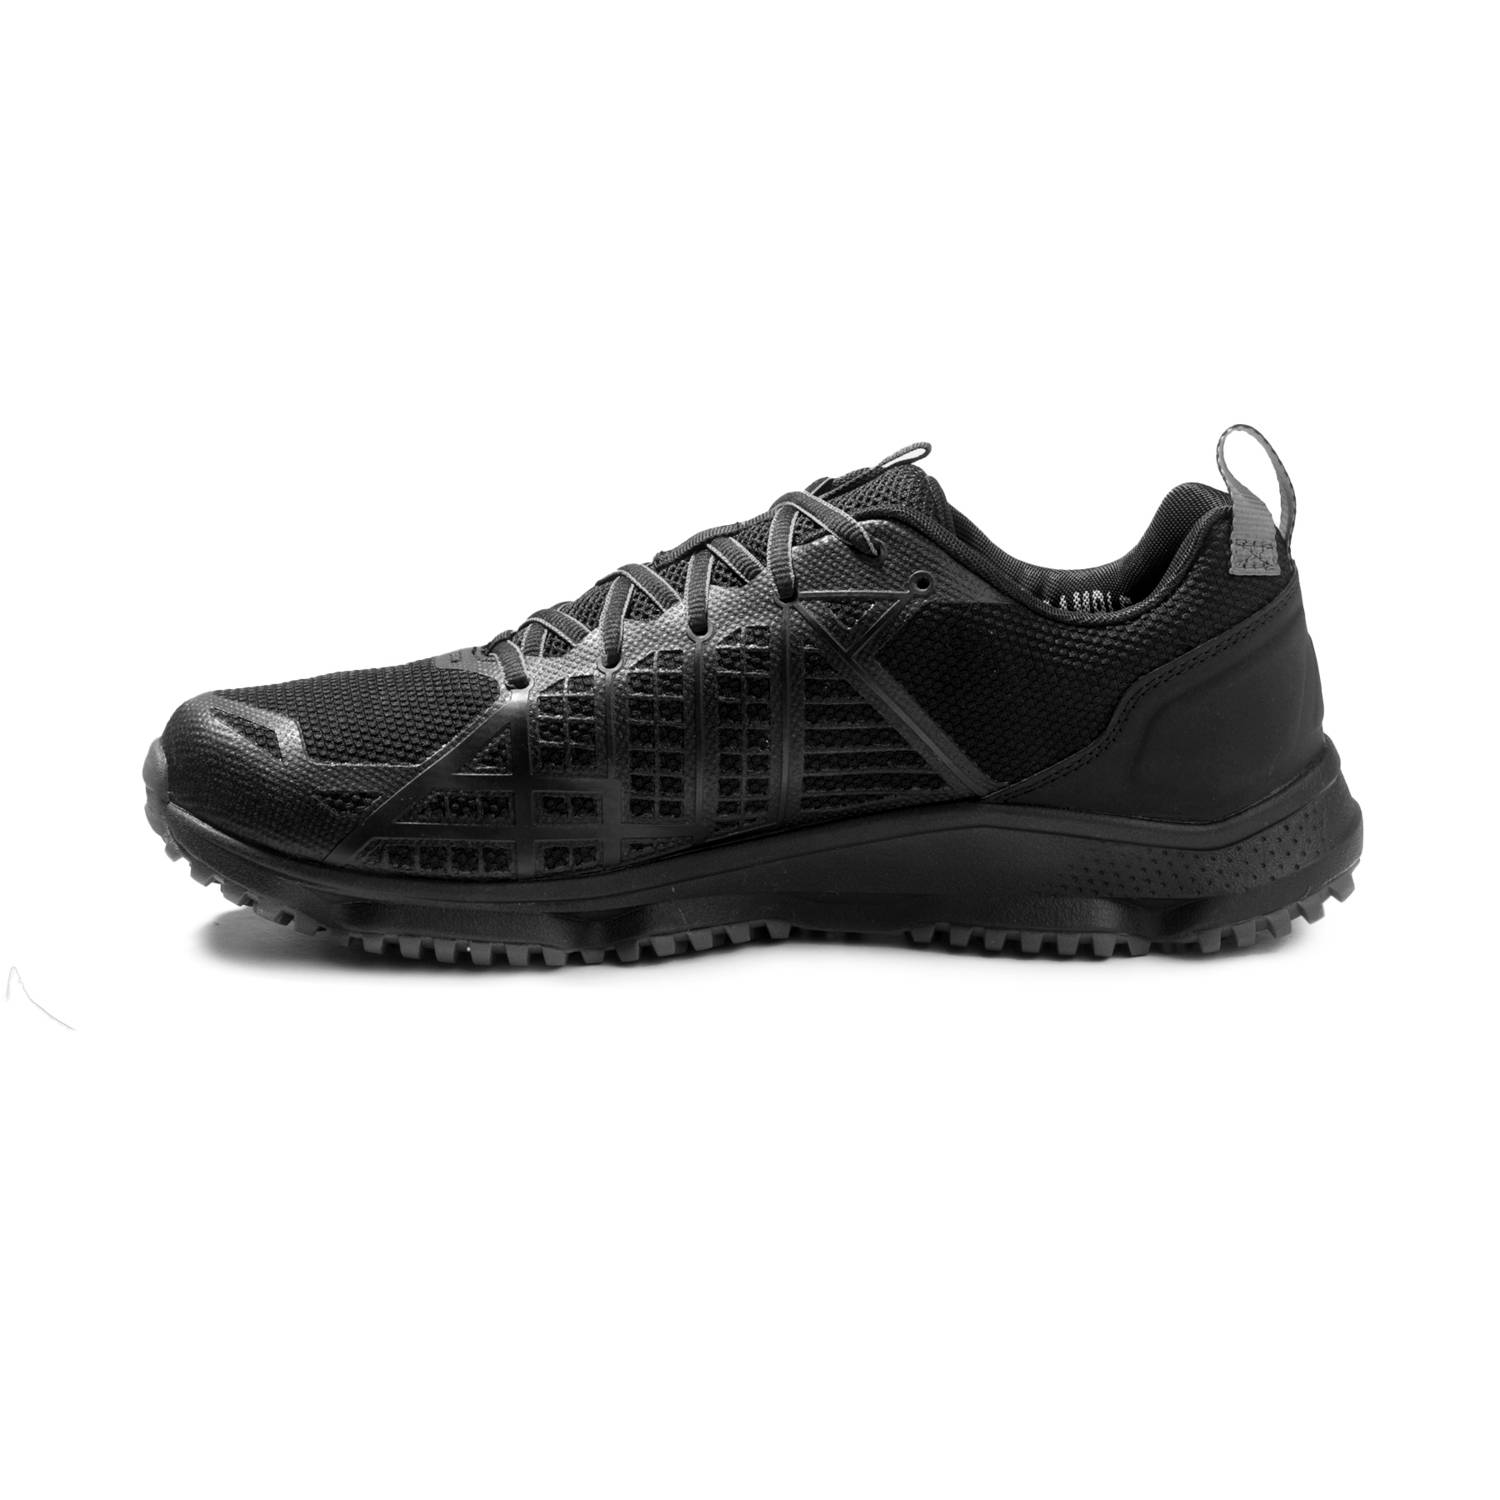 Under Armour MG Strikefast Athletic Shoes